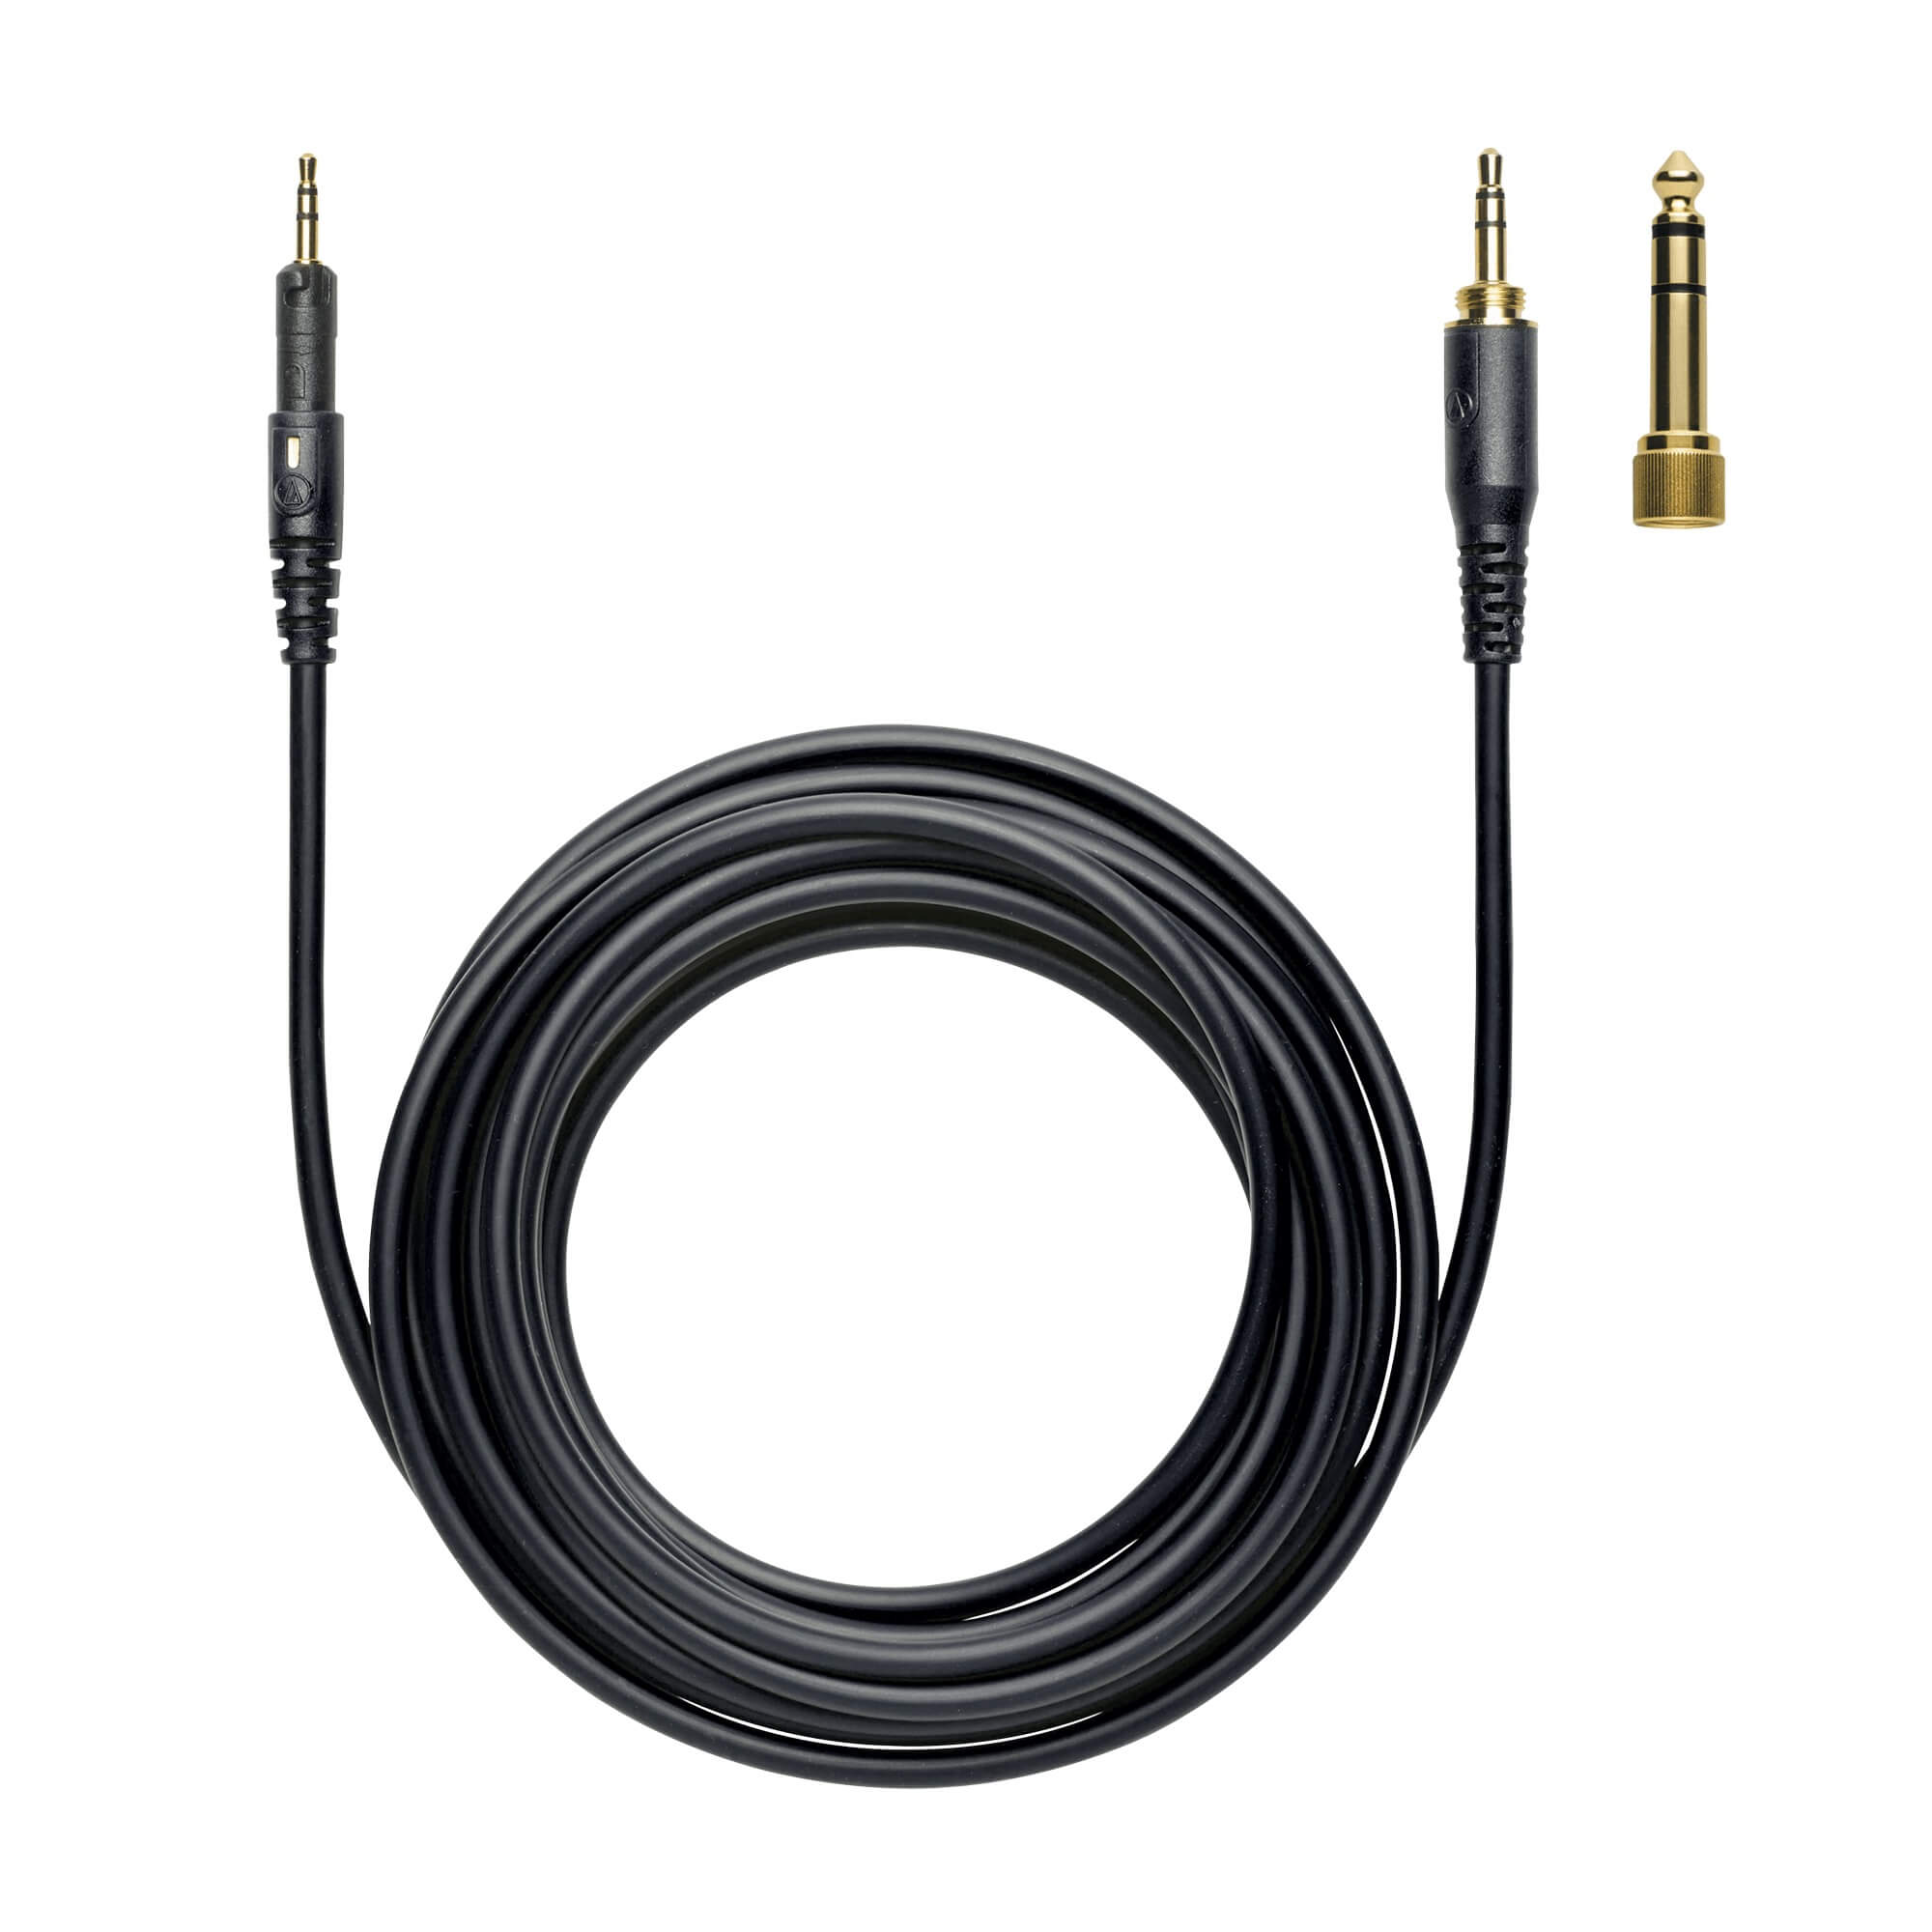 Audio-Technica ATH-M60x Professional Monitor Headphones, detachable straight audio cable with 1/4" plug adapter